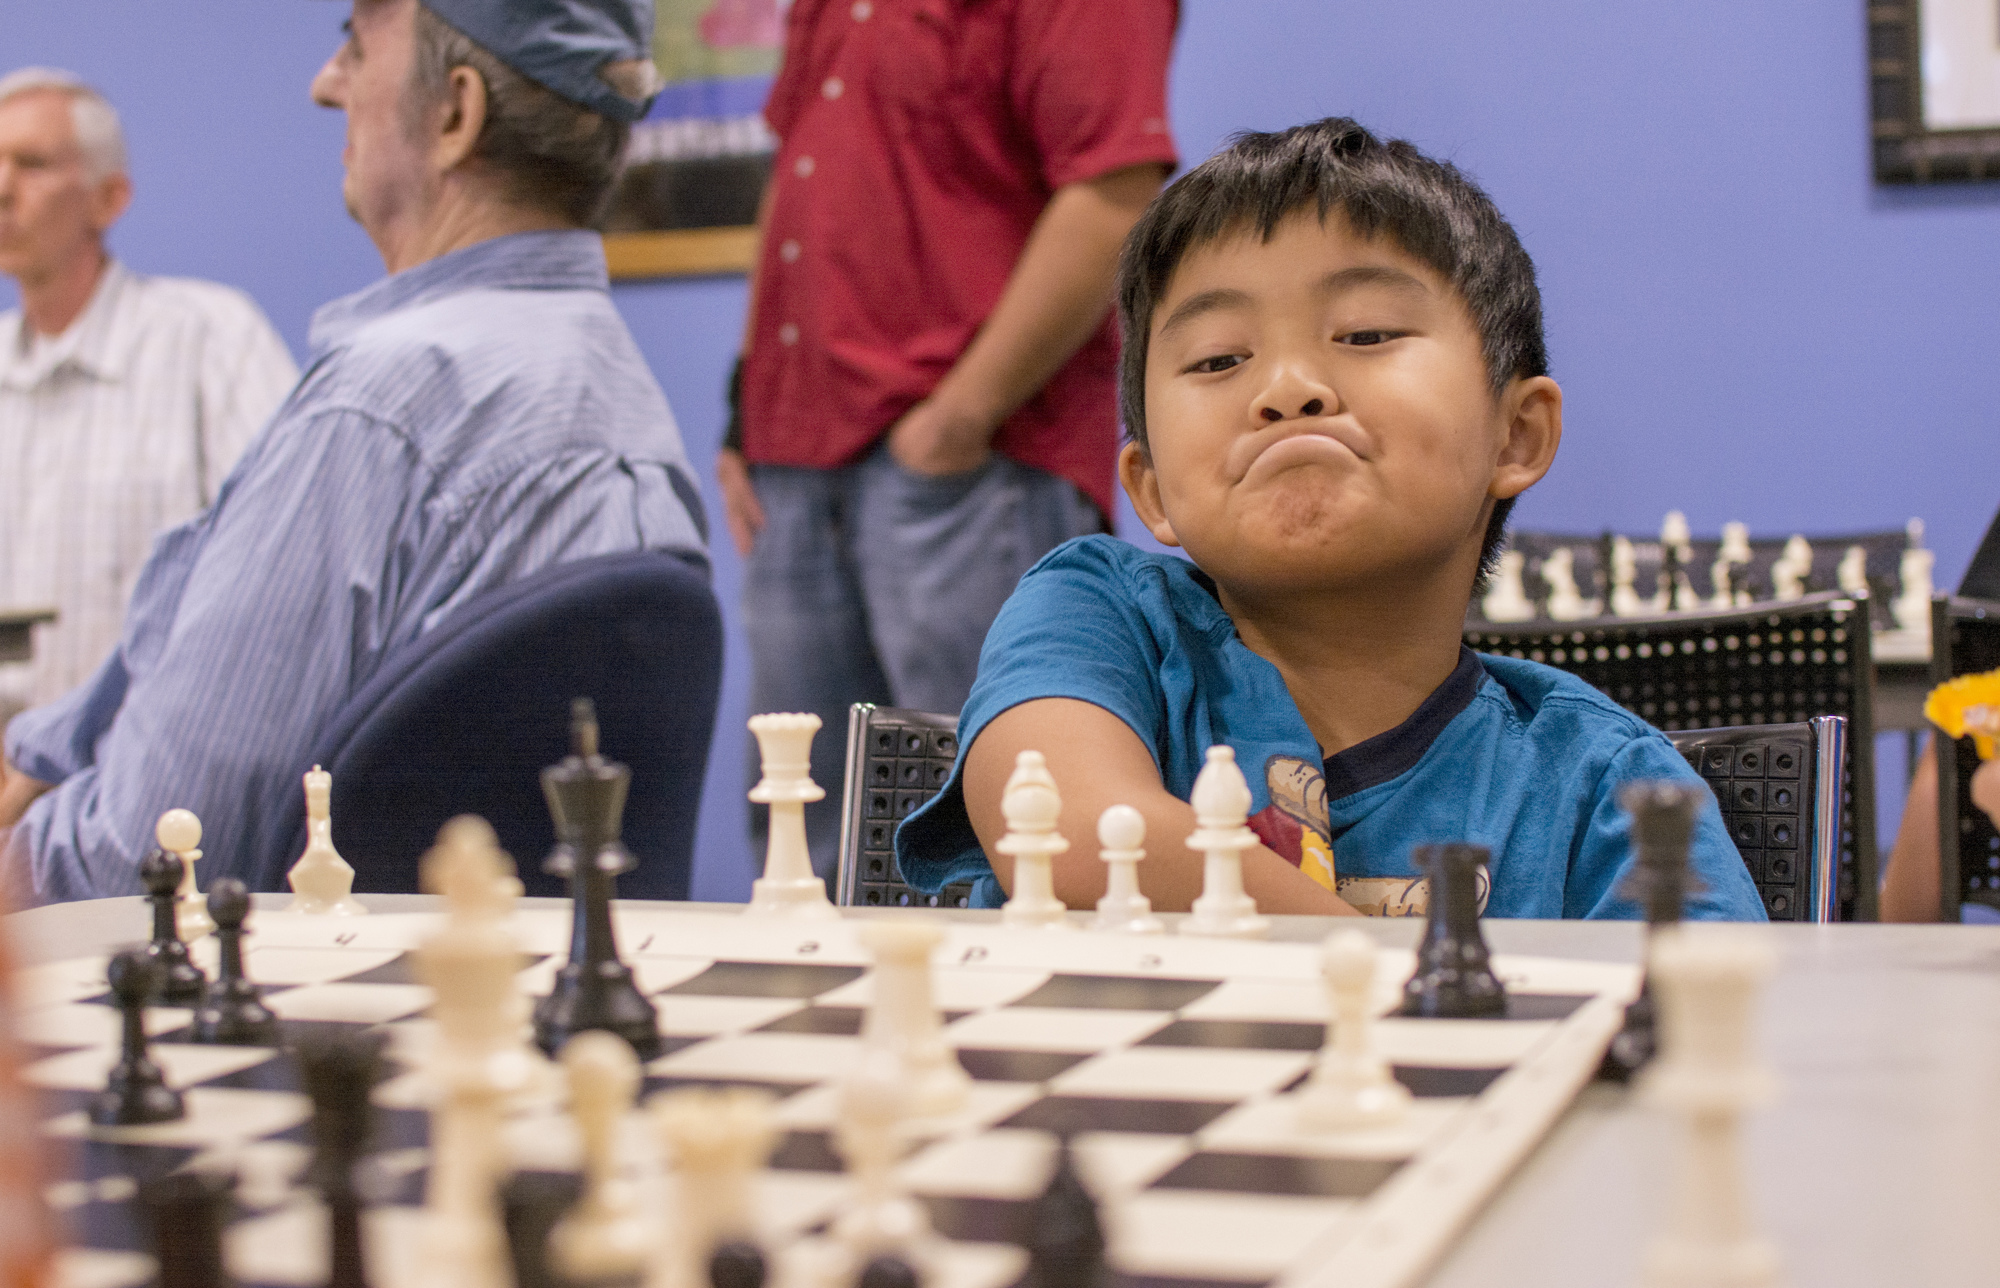 Ethan Song participates in the youth chess tournament at Fruitville Public Library.